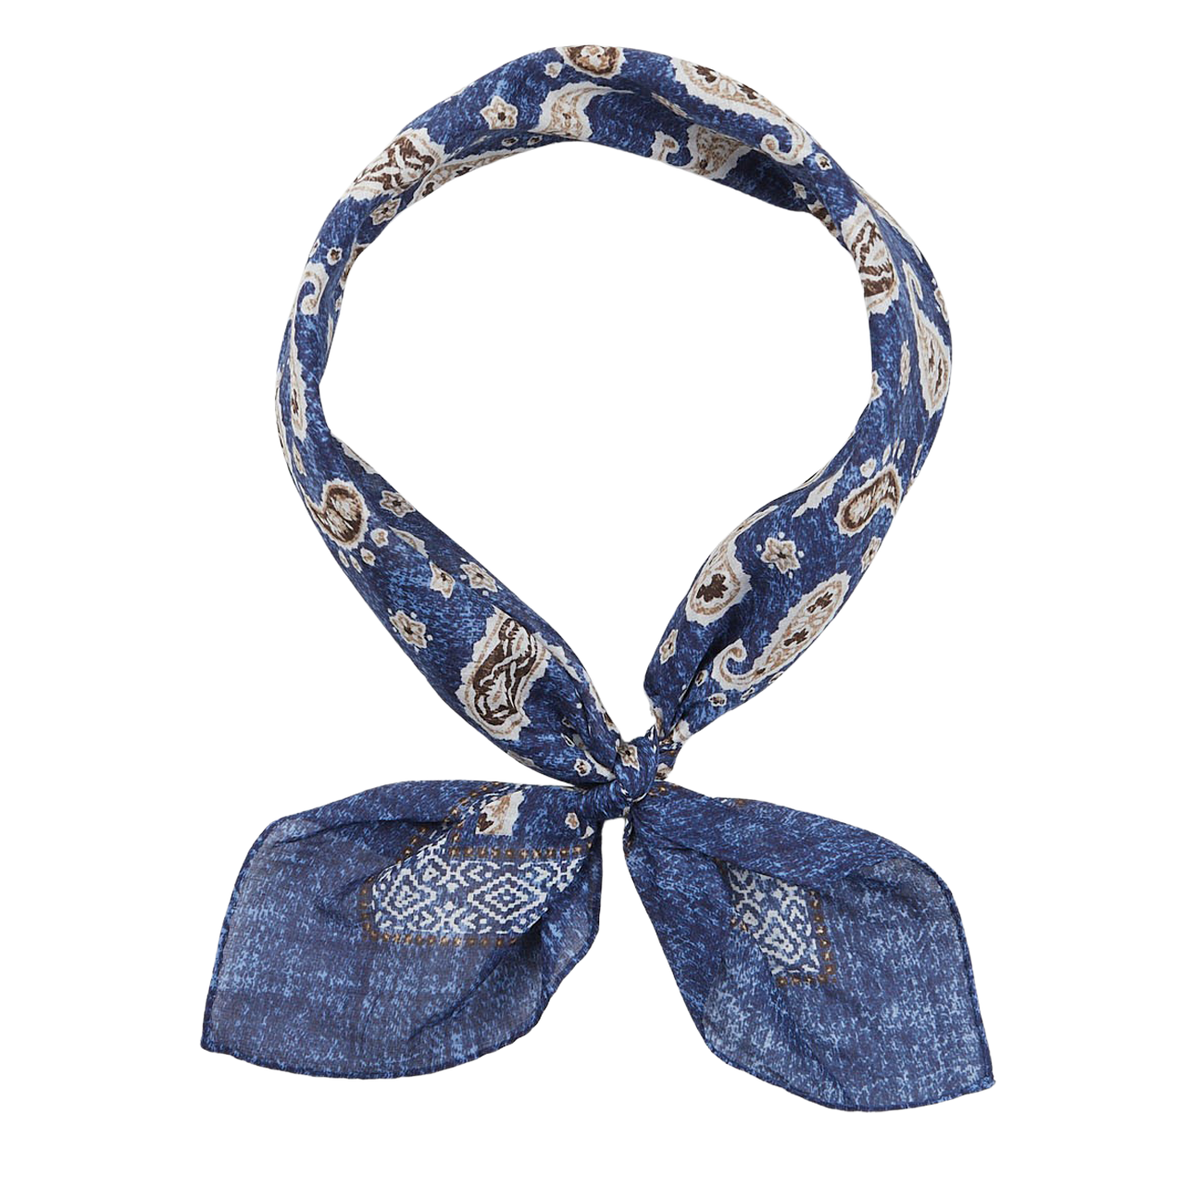 Blue Melange Paisley Print Cotton Bandana from Amanda Christensen tied in a knot with a bow.